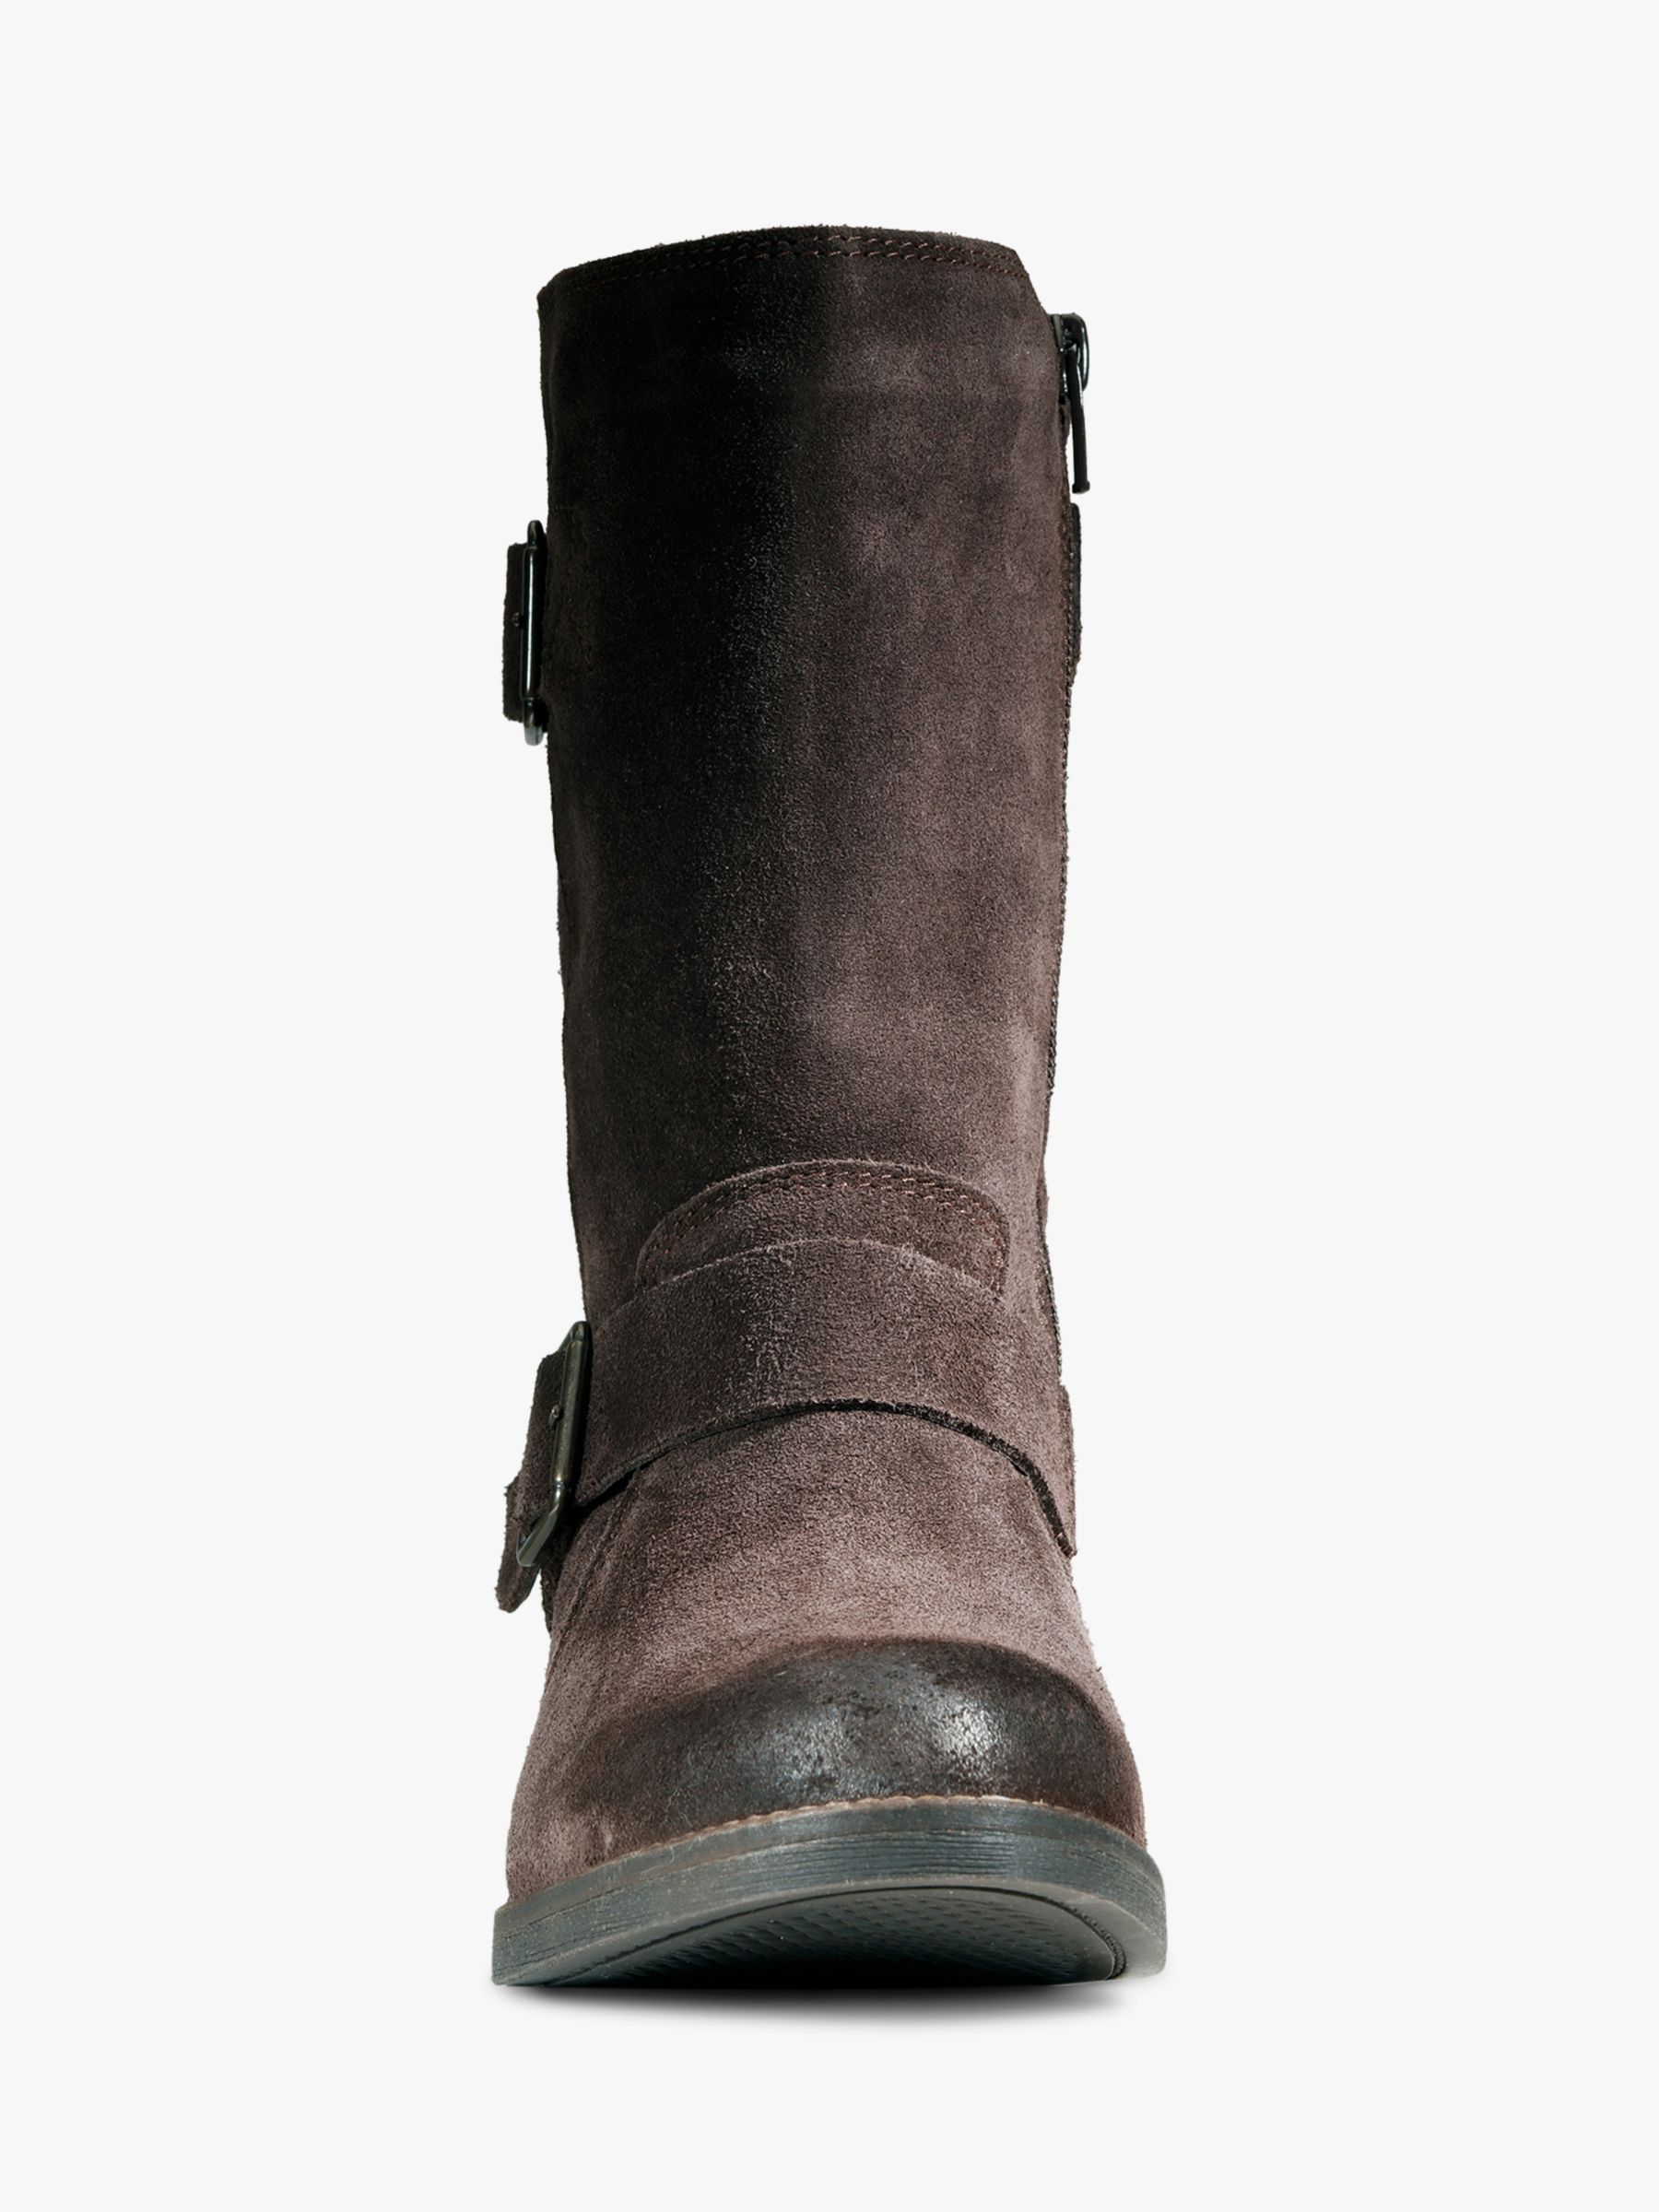 clarks mid calf leather boots